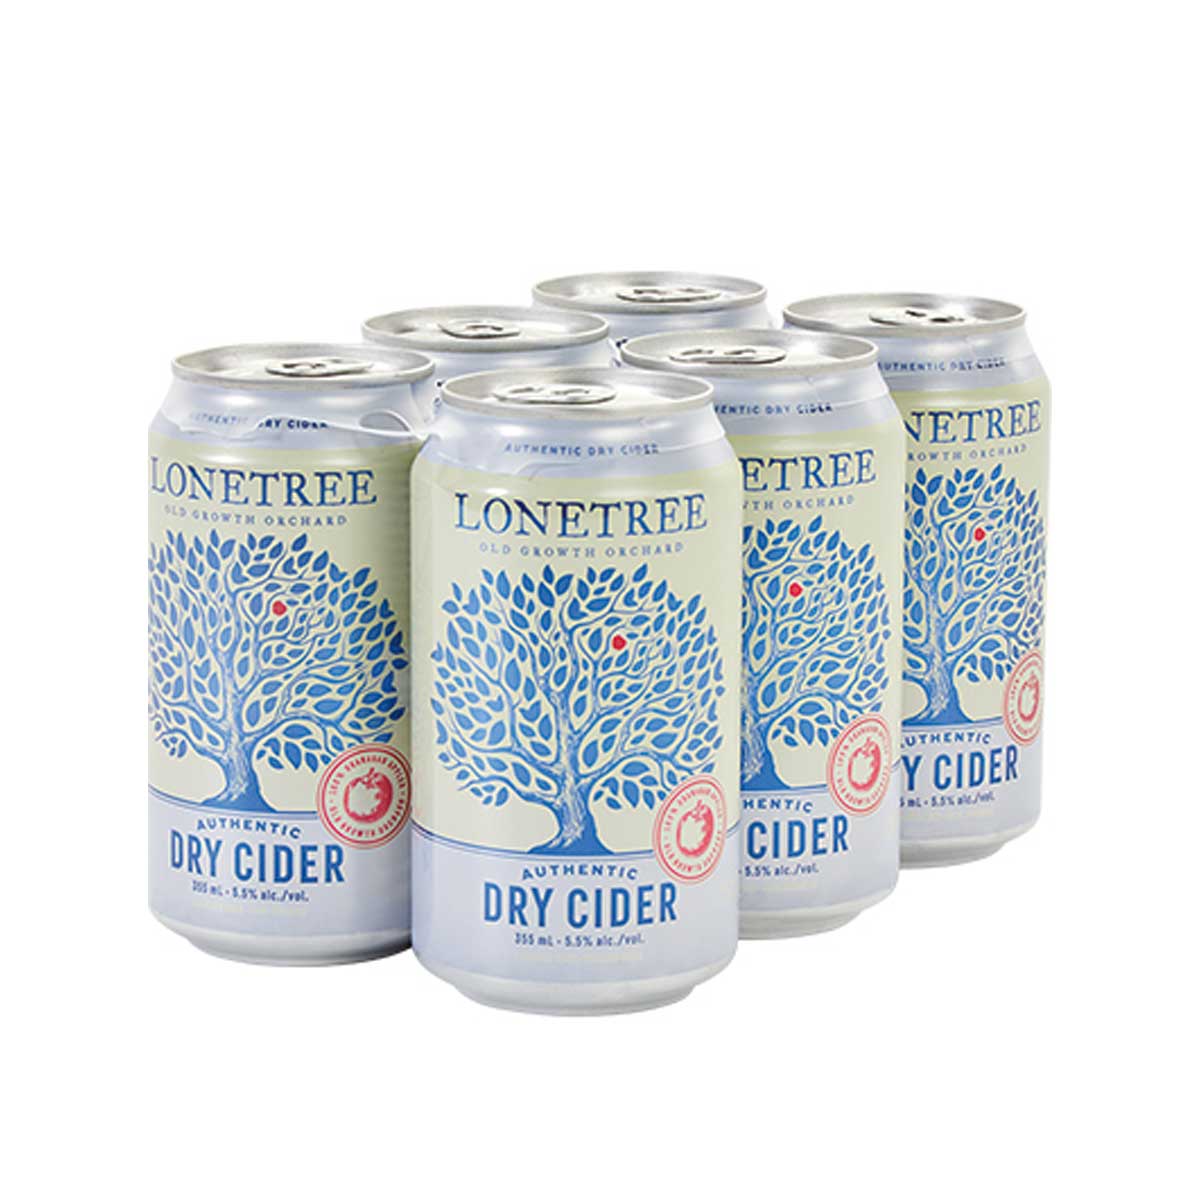 TAG Liquor Stores BC-LONE TREE APPLE 6 CANS